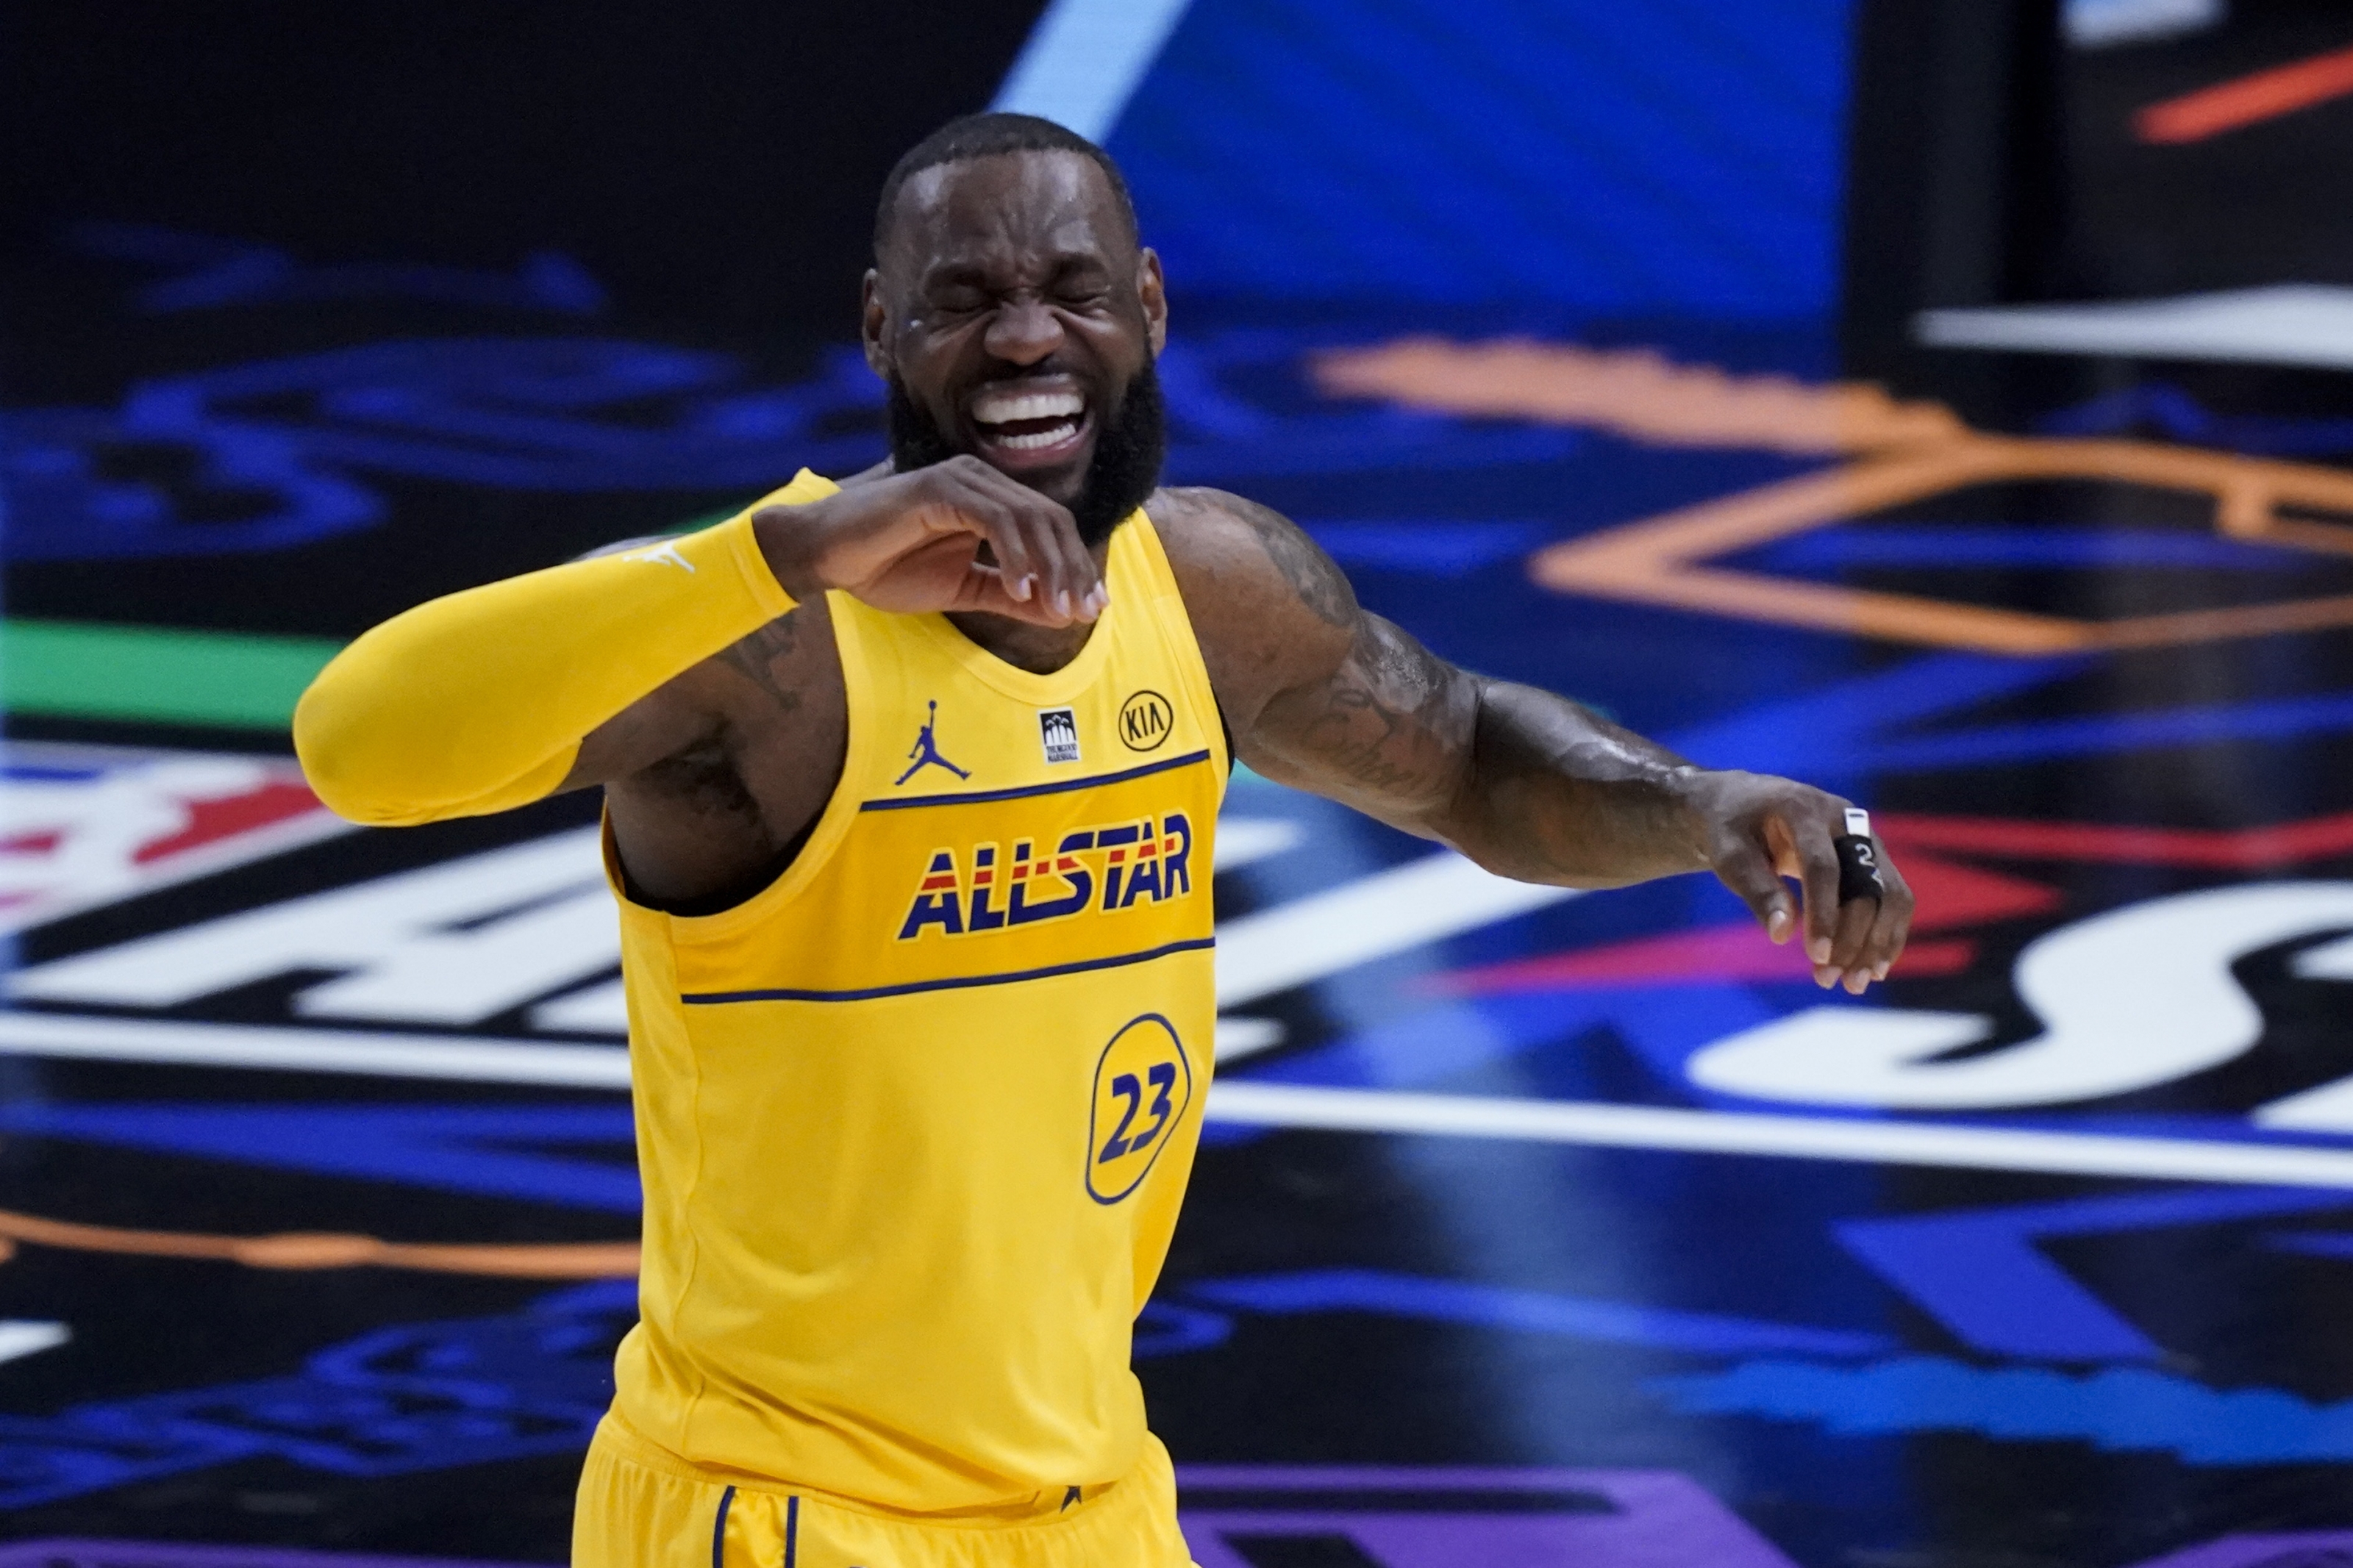 Still perfect: Team LeBron wins NBA All-Star Game 170-150 - WISH-TV, Indianapolis News, Indiana Weather